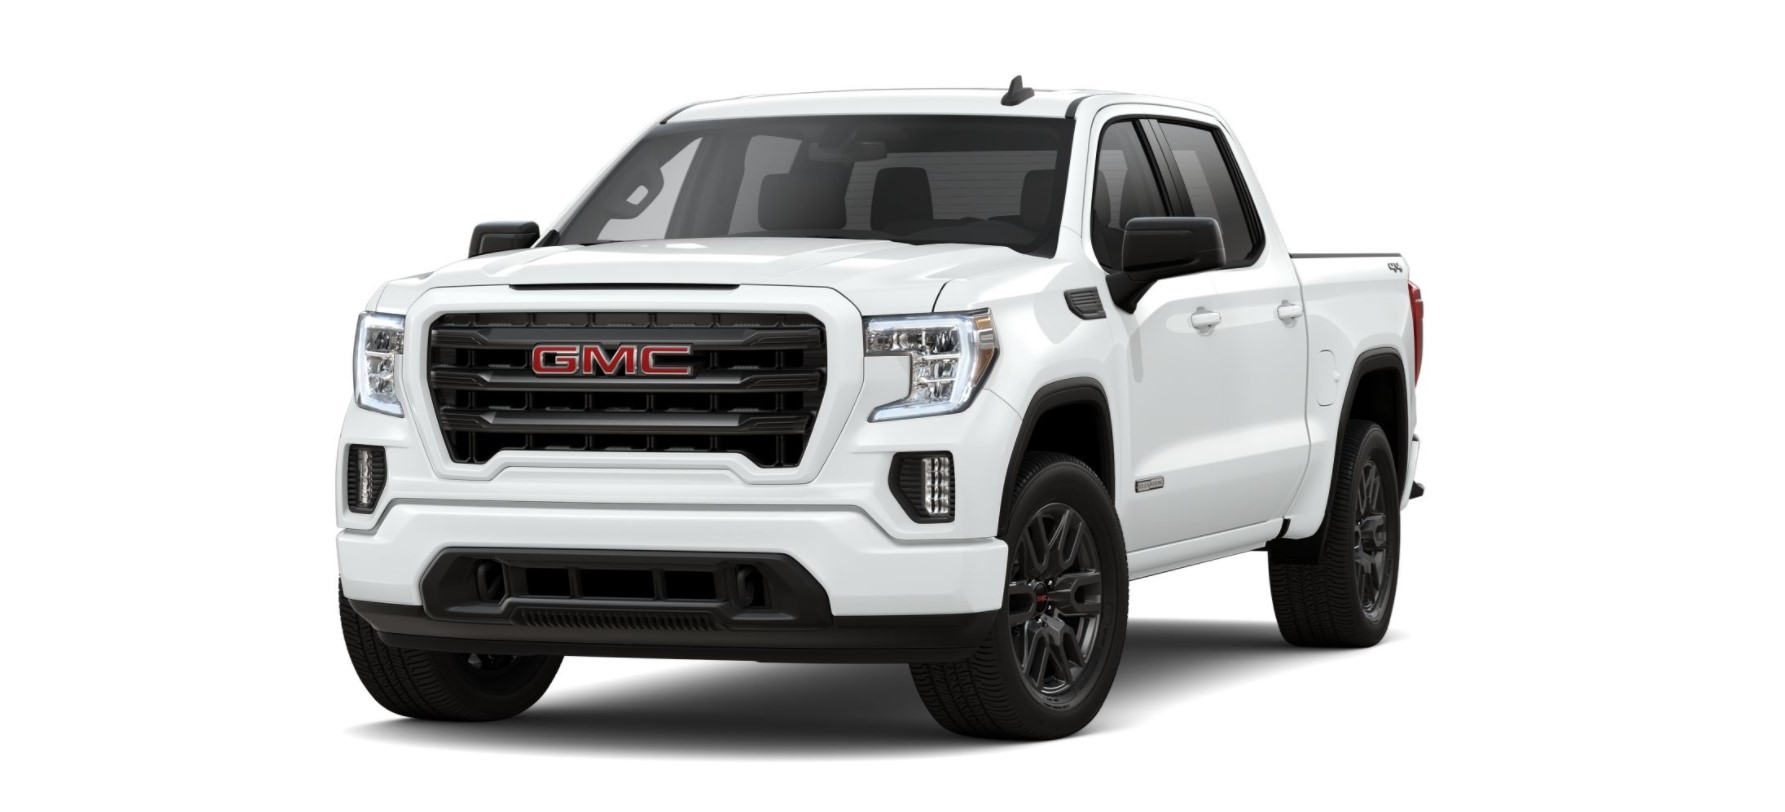 2022 GMC Sierra 1500 Limited Pro Full Specs, Features and Price | CarBuzz